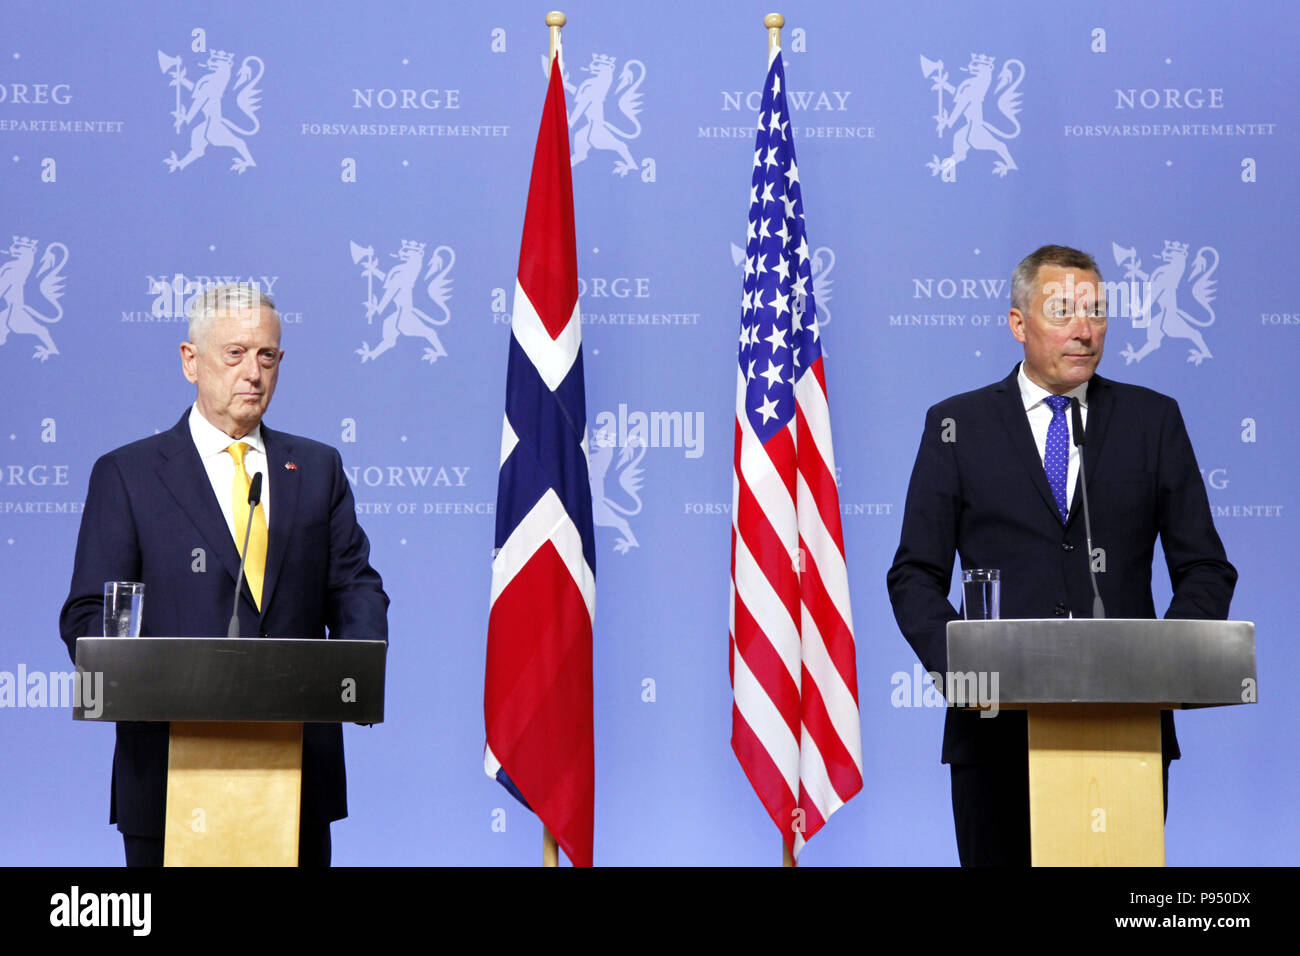 Oslo, Norway. 14th July, 2018. U.S. Secretary of Defense James Mattis (L) attends a joint press conference with Norwegian Minister of Defence Frank Bakke-Jensen in Oslo, Norway, July 14, 2018. Norway on Saturday reconfirmed its commitment to gradually increase defense spending to two percent of GDP in the North Atlantic Treaty Organization (NATO) during a visit by U.S. Secretary of Defense James Mattis to the Nordic country. Credit: Liang Youchang/Xinhua/Alamy Live News Stock Photo